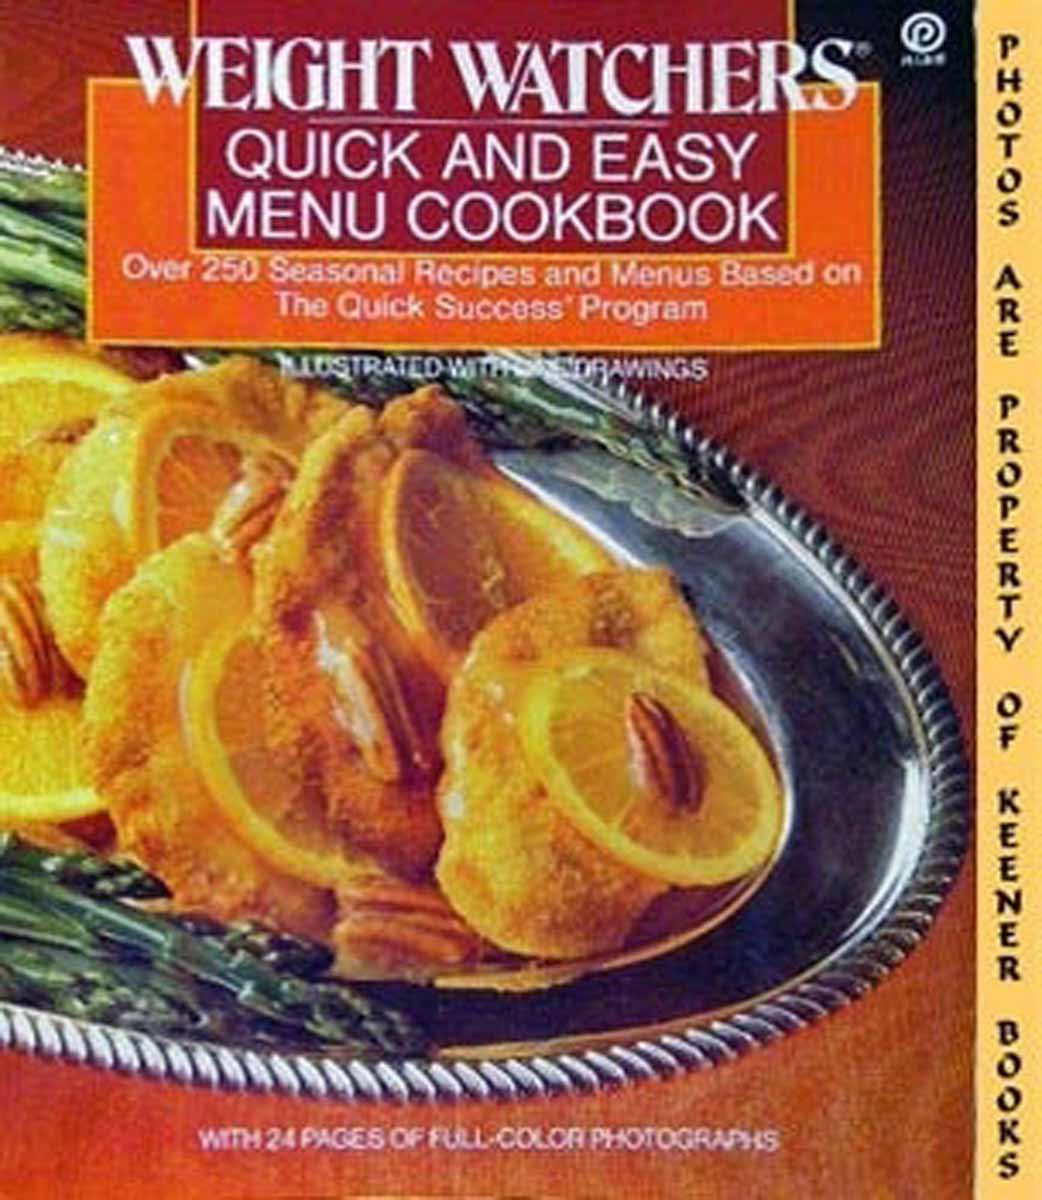 WEIGHT WATCHERS INTERNATIONAL EDITORS - Weight Watchers Quick and Easy Menu Cookbook : Over 250 Seasonal Recipes and Menus Based on the Quick Success Program